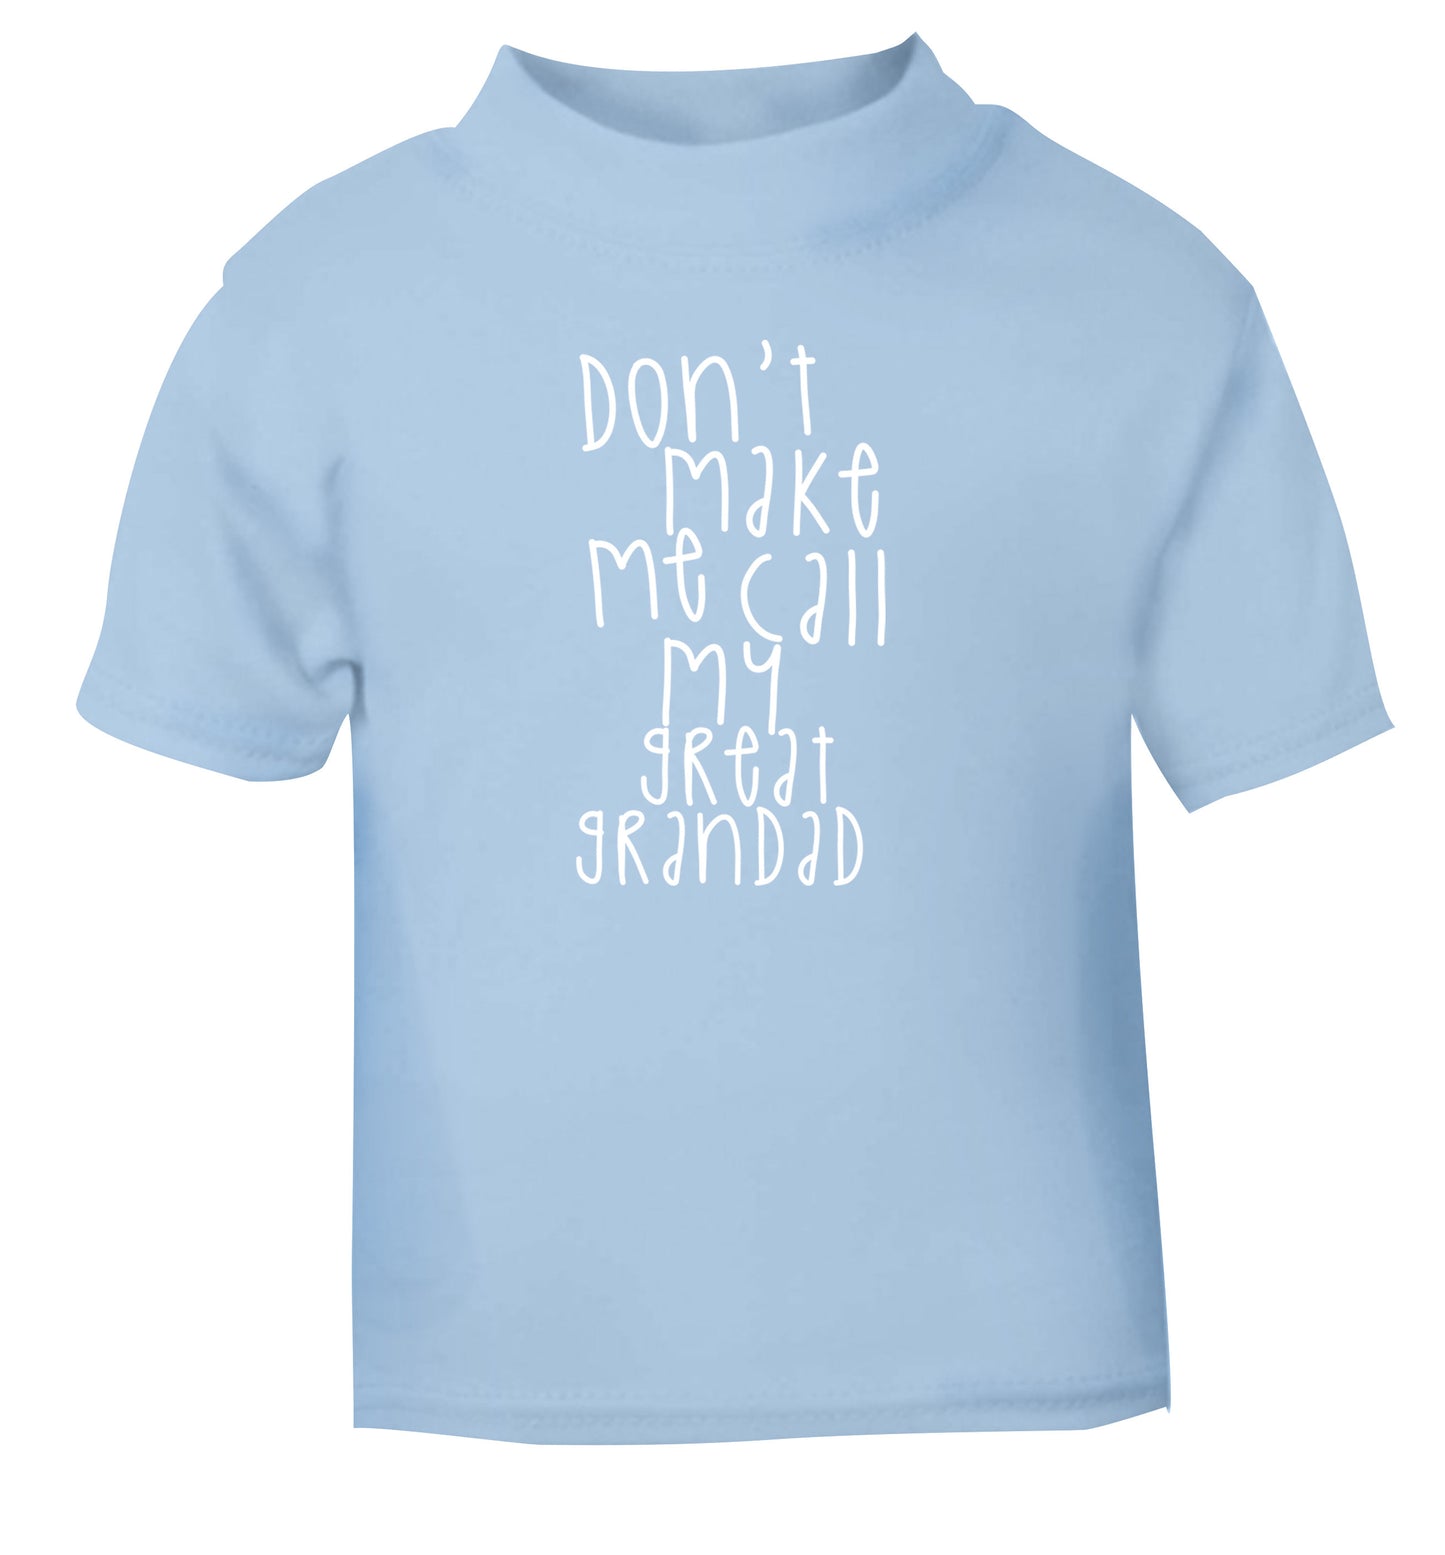 Don't make me call my great grandad light blue Baby Toddler Tshirt 2 Years